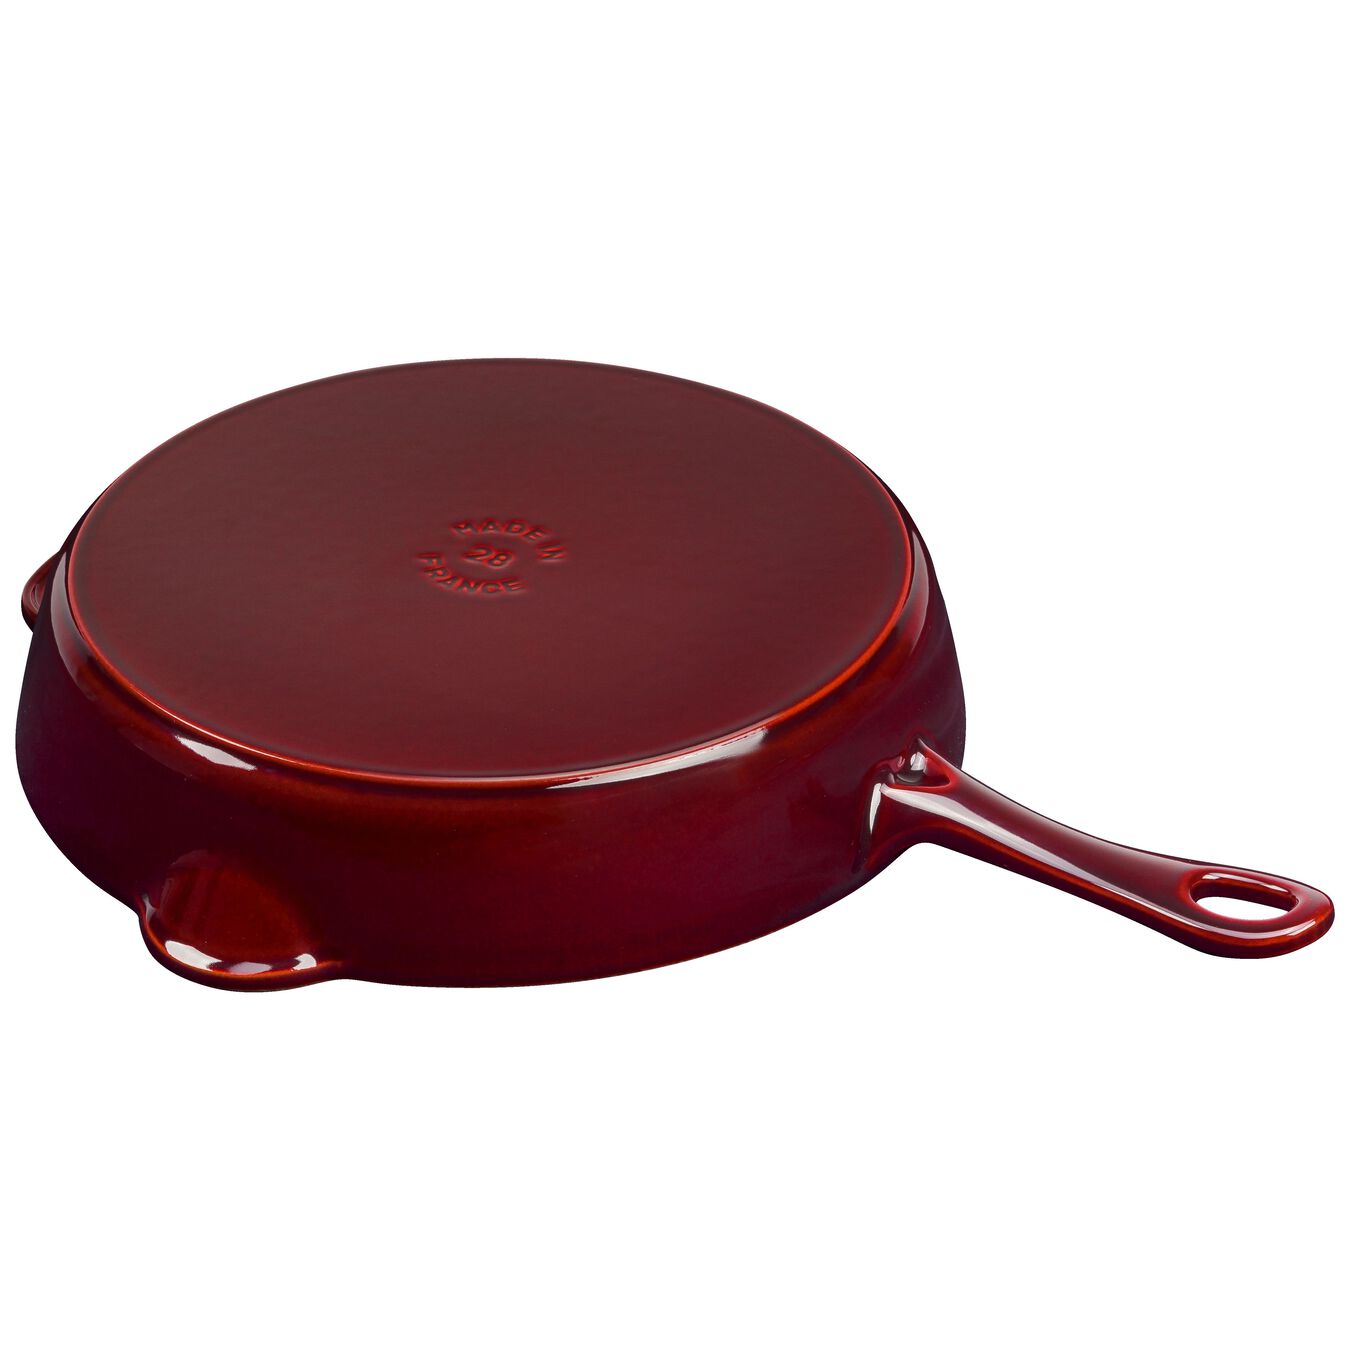 28 cm / 11 inch cast iron Frying pan, grenadine-red - Visual Imperfections,,large 5